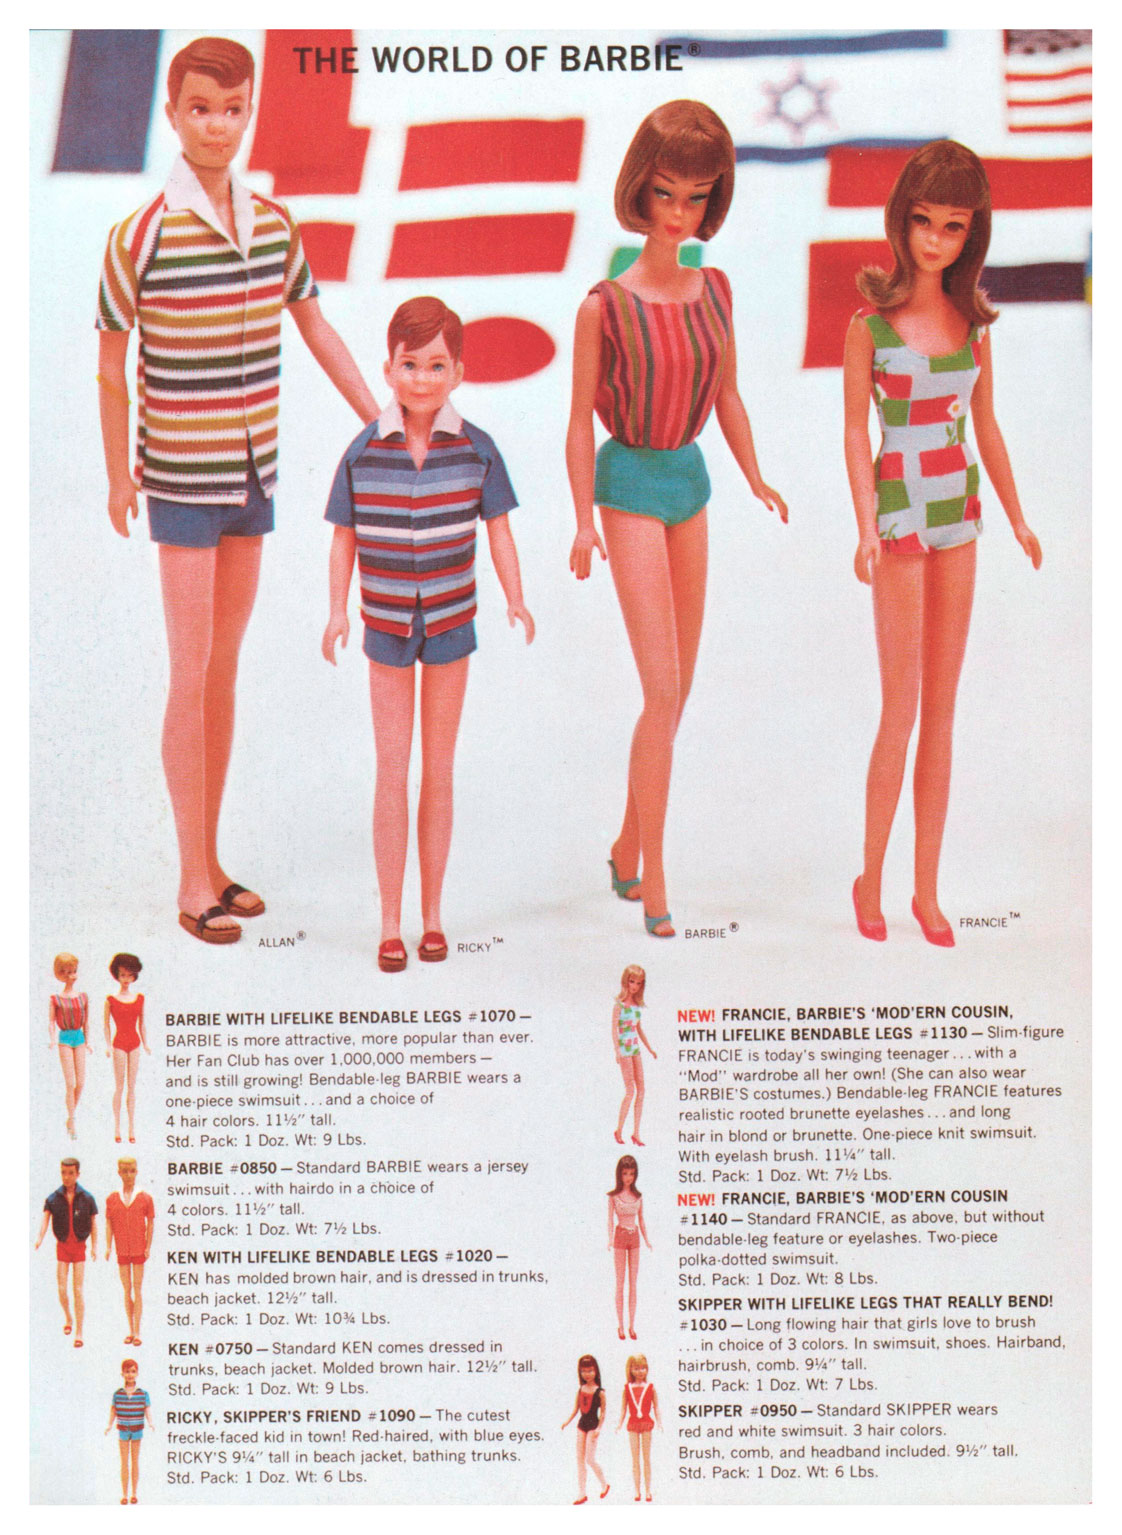 From Mattel Toys 1966 catalogue